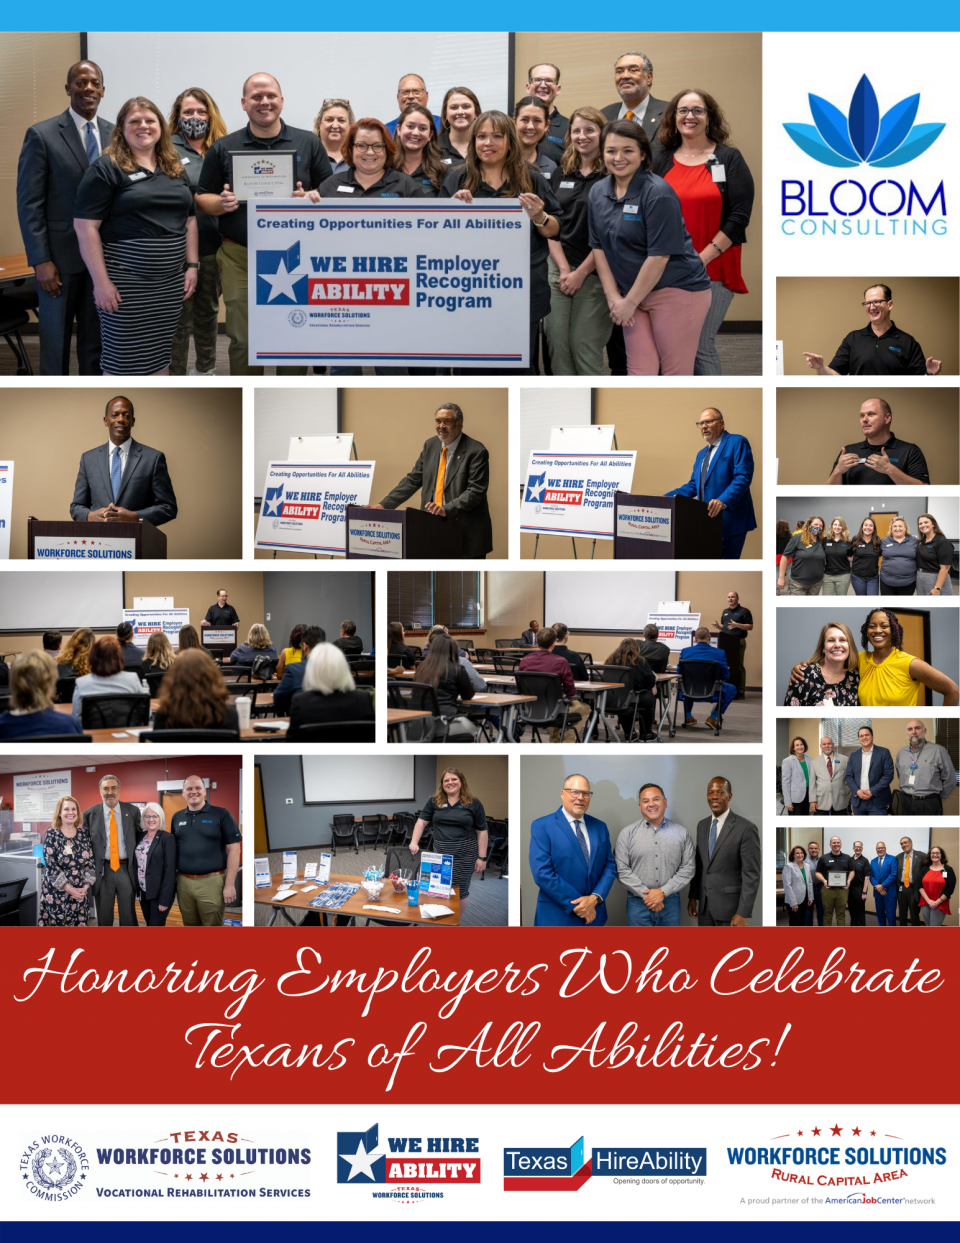 Bloom Consulting Honored as 'We Hire Ability' Employer at Round Rock Ceremony